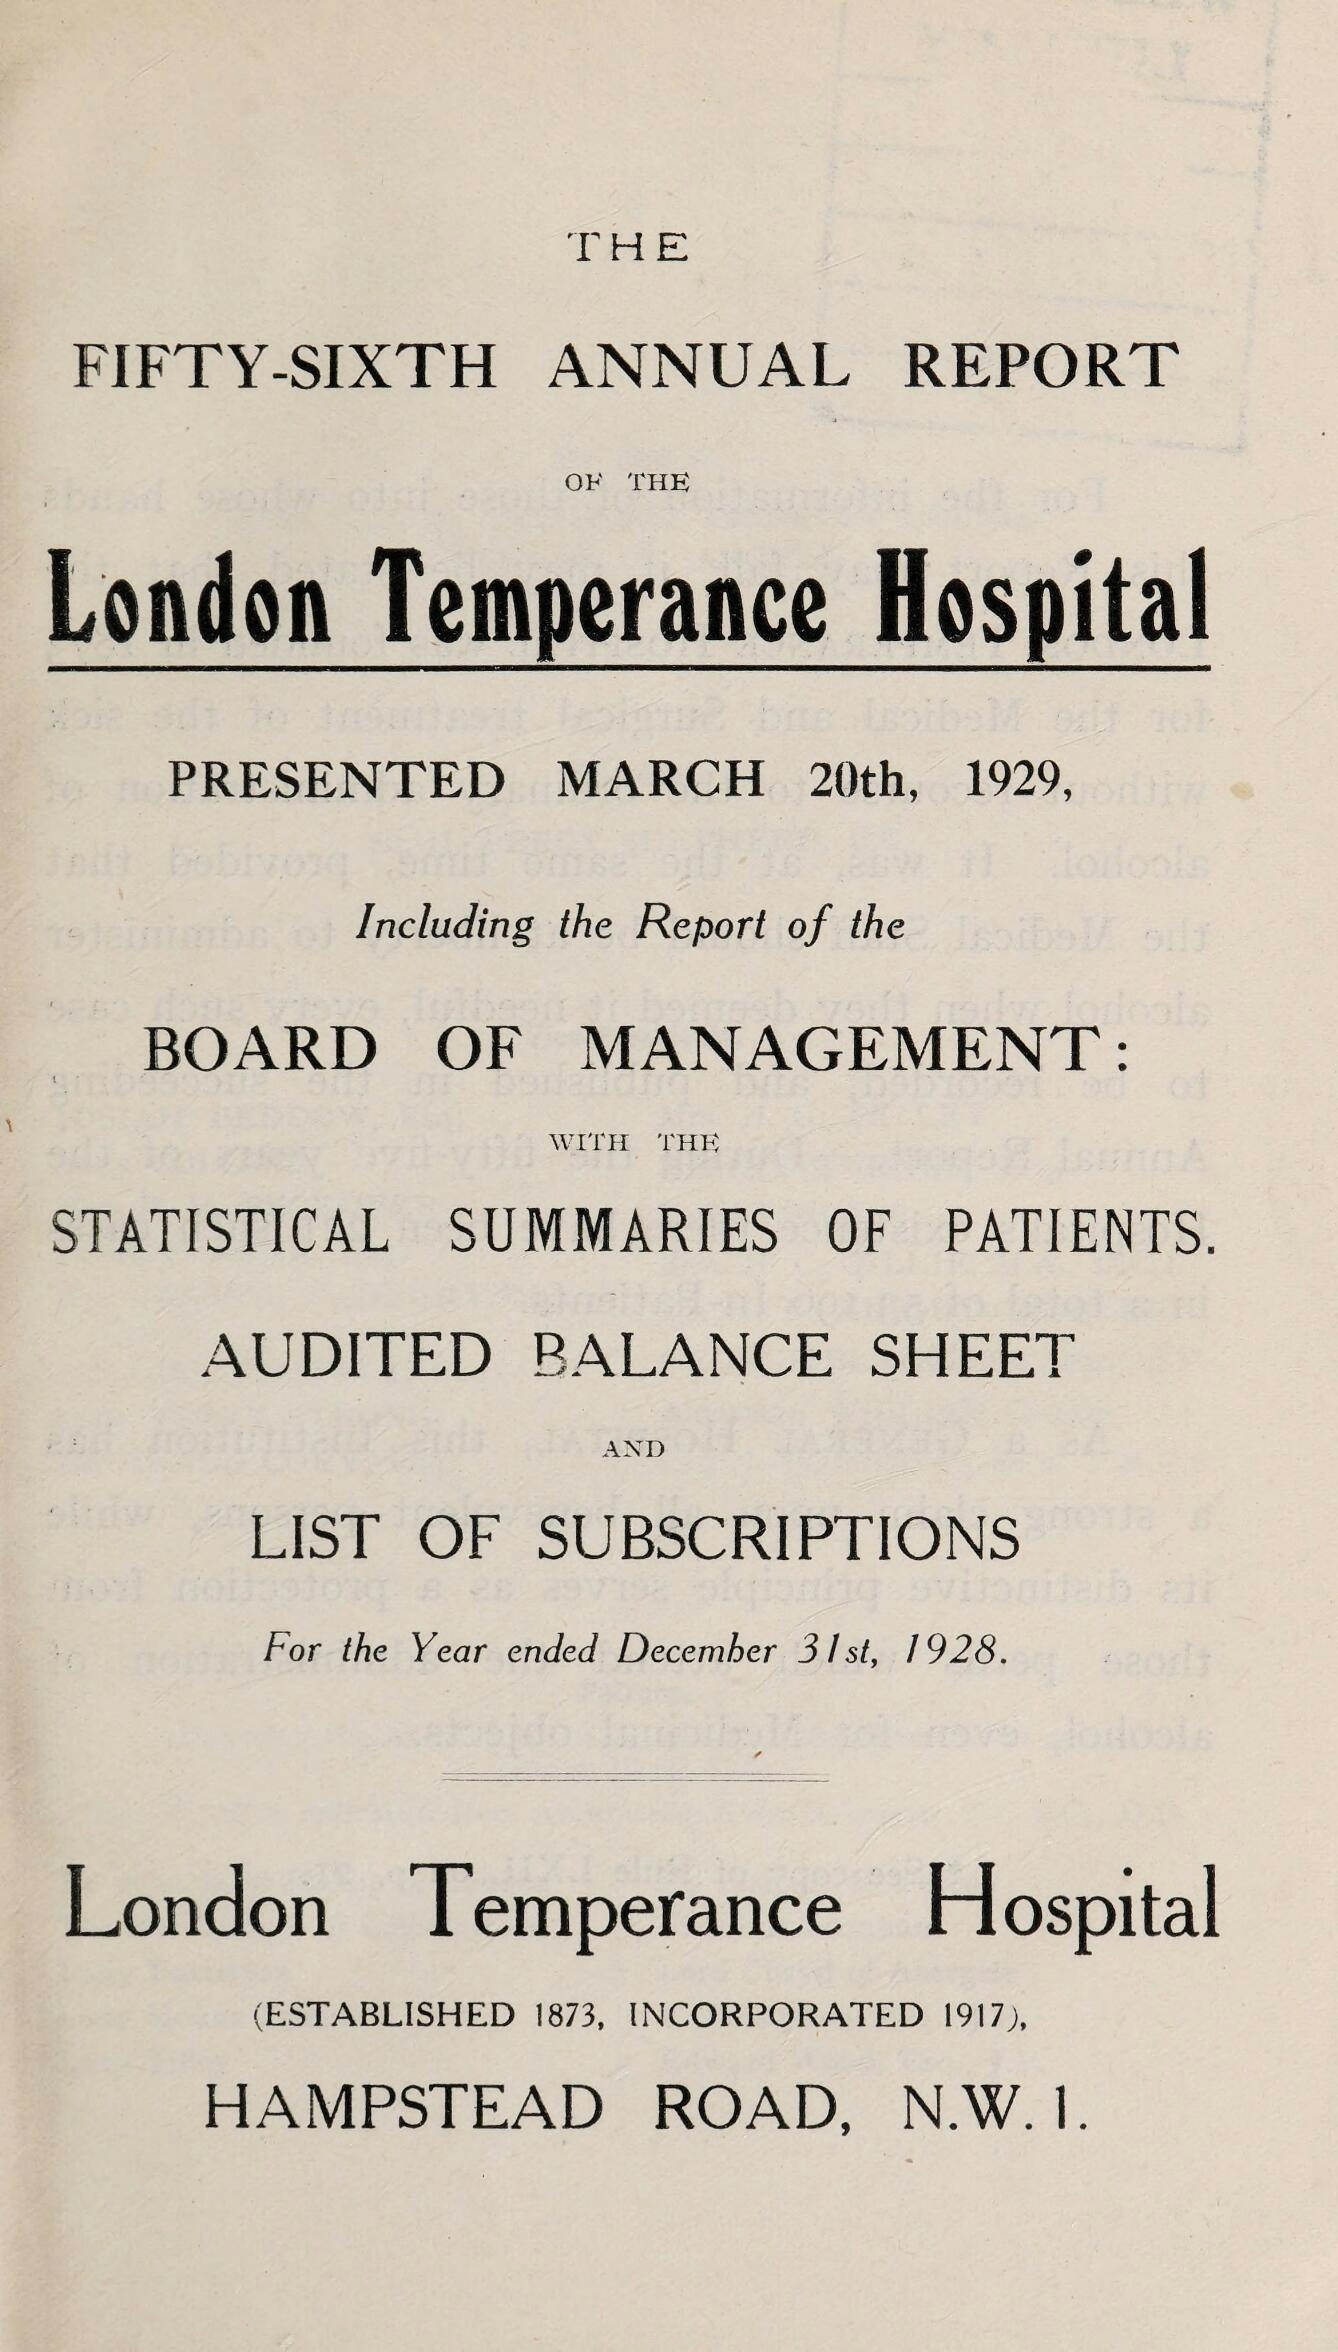 Title page of book.  The text reads 'The fifty-sixth annual report of the London Temperance Hospital presented March 20th, 1929, including the report of the board of management: with the statistical summaries of patients, audited balance sheet and list of subscriptions for the year ended December 31st, 1928.  London Temperance Hospital (Established 1873, incorporated 1917), Hampstead Road, NW1.'